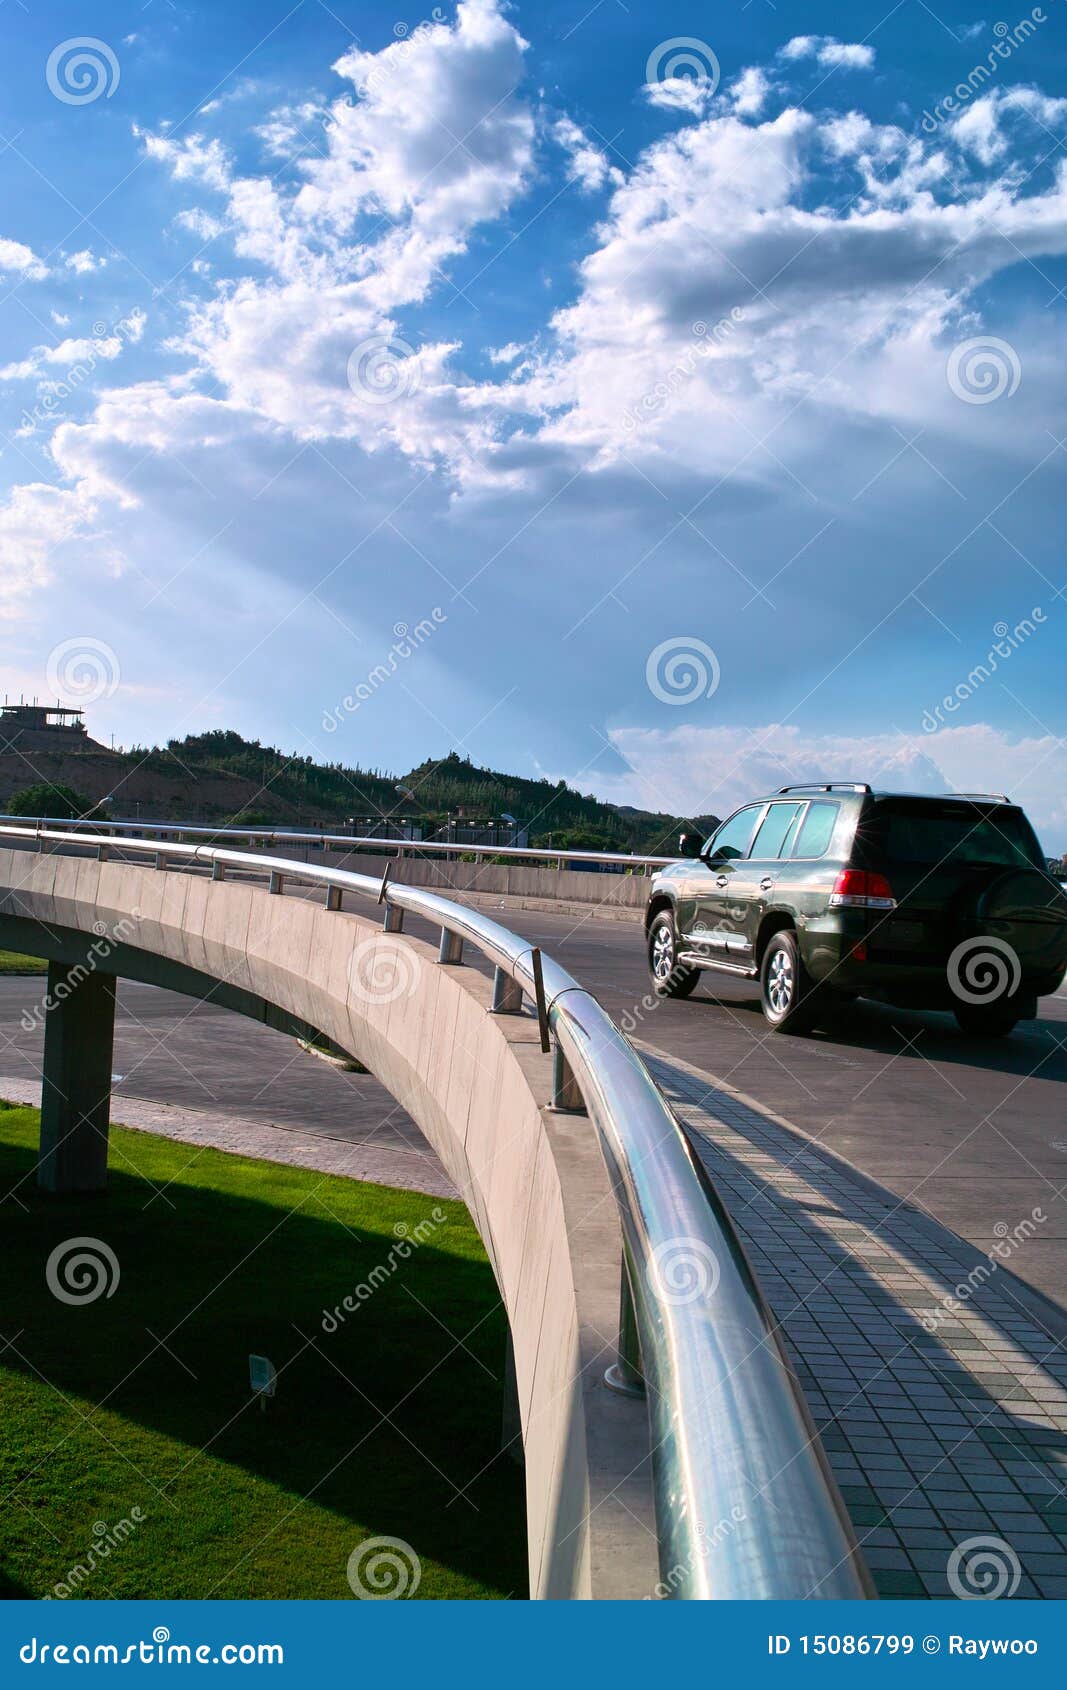 car moving on the elevated road